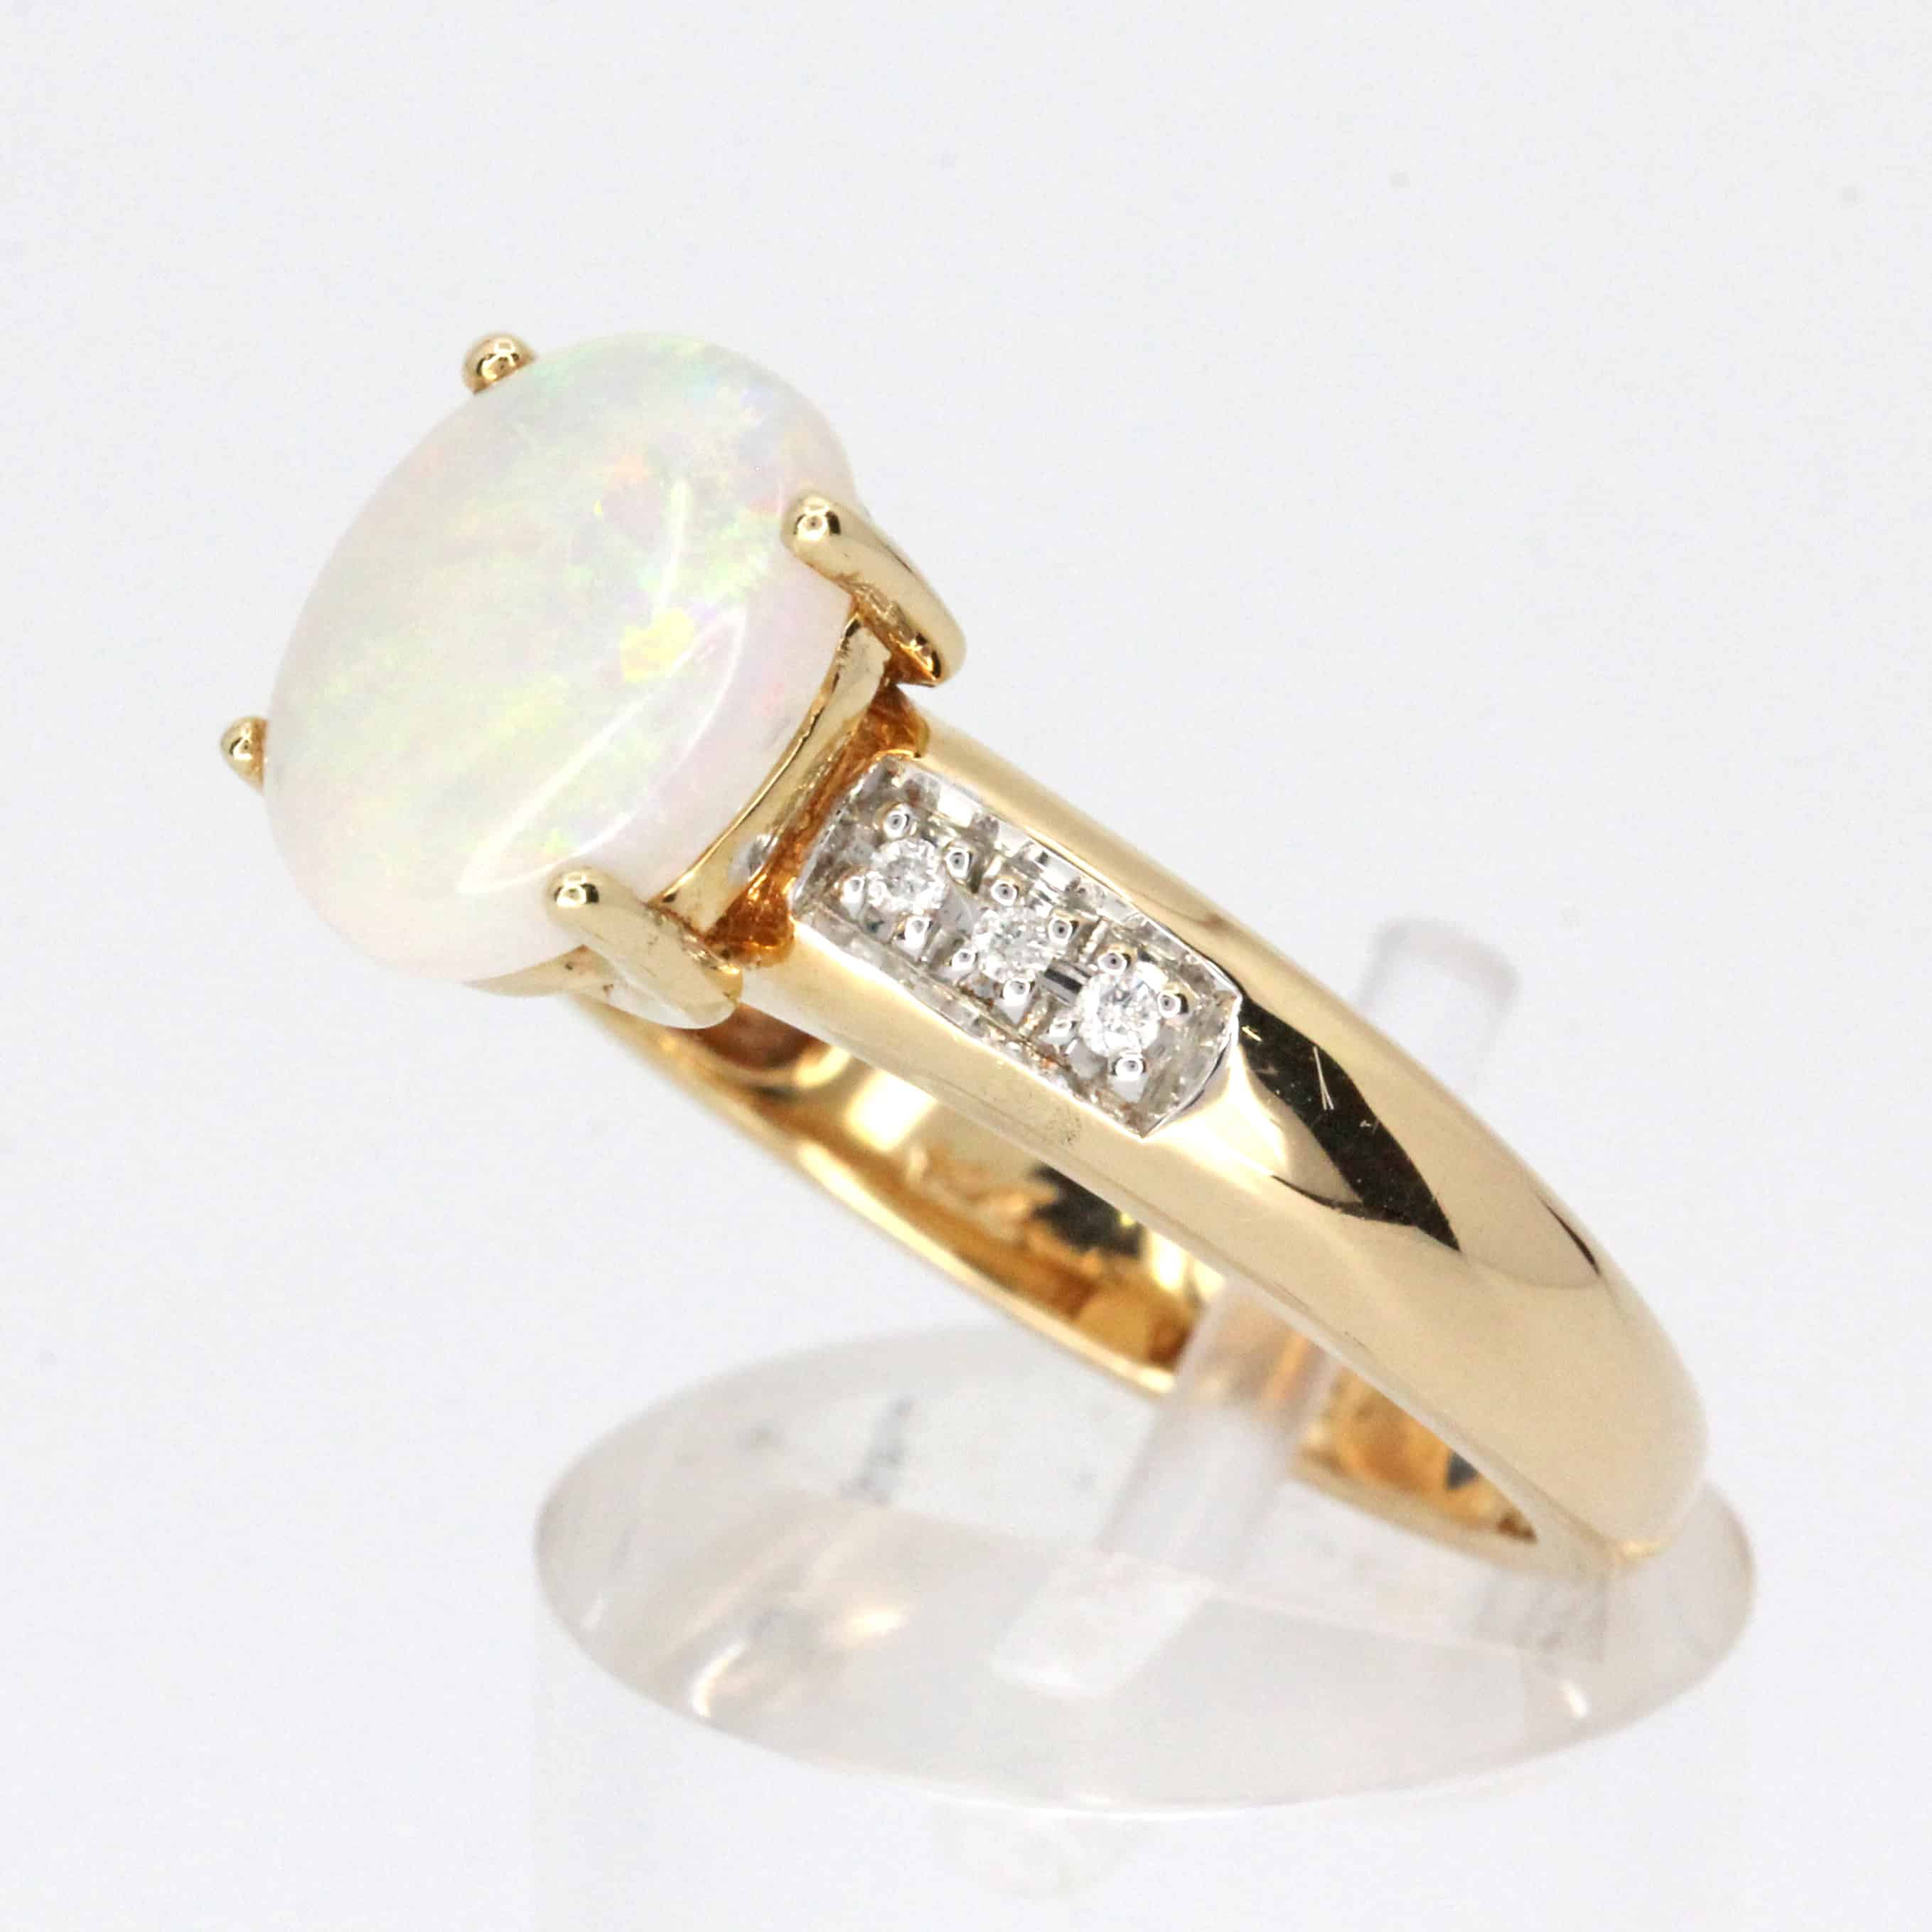 White Opal Ring with Diamond Accents Set in 9ct Yellow Gold Allgem